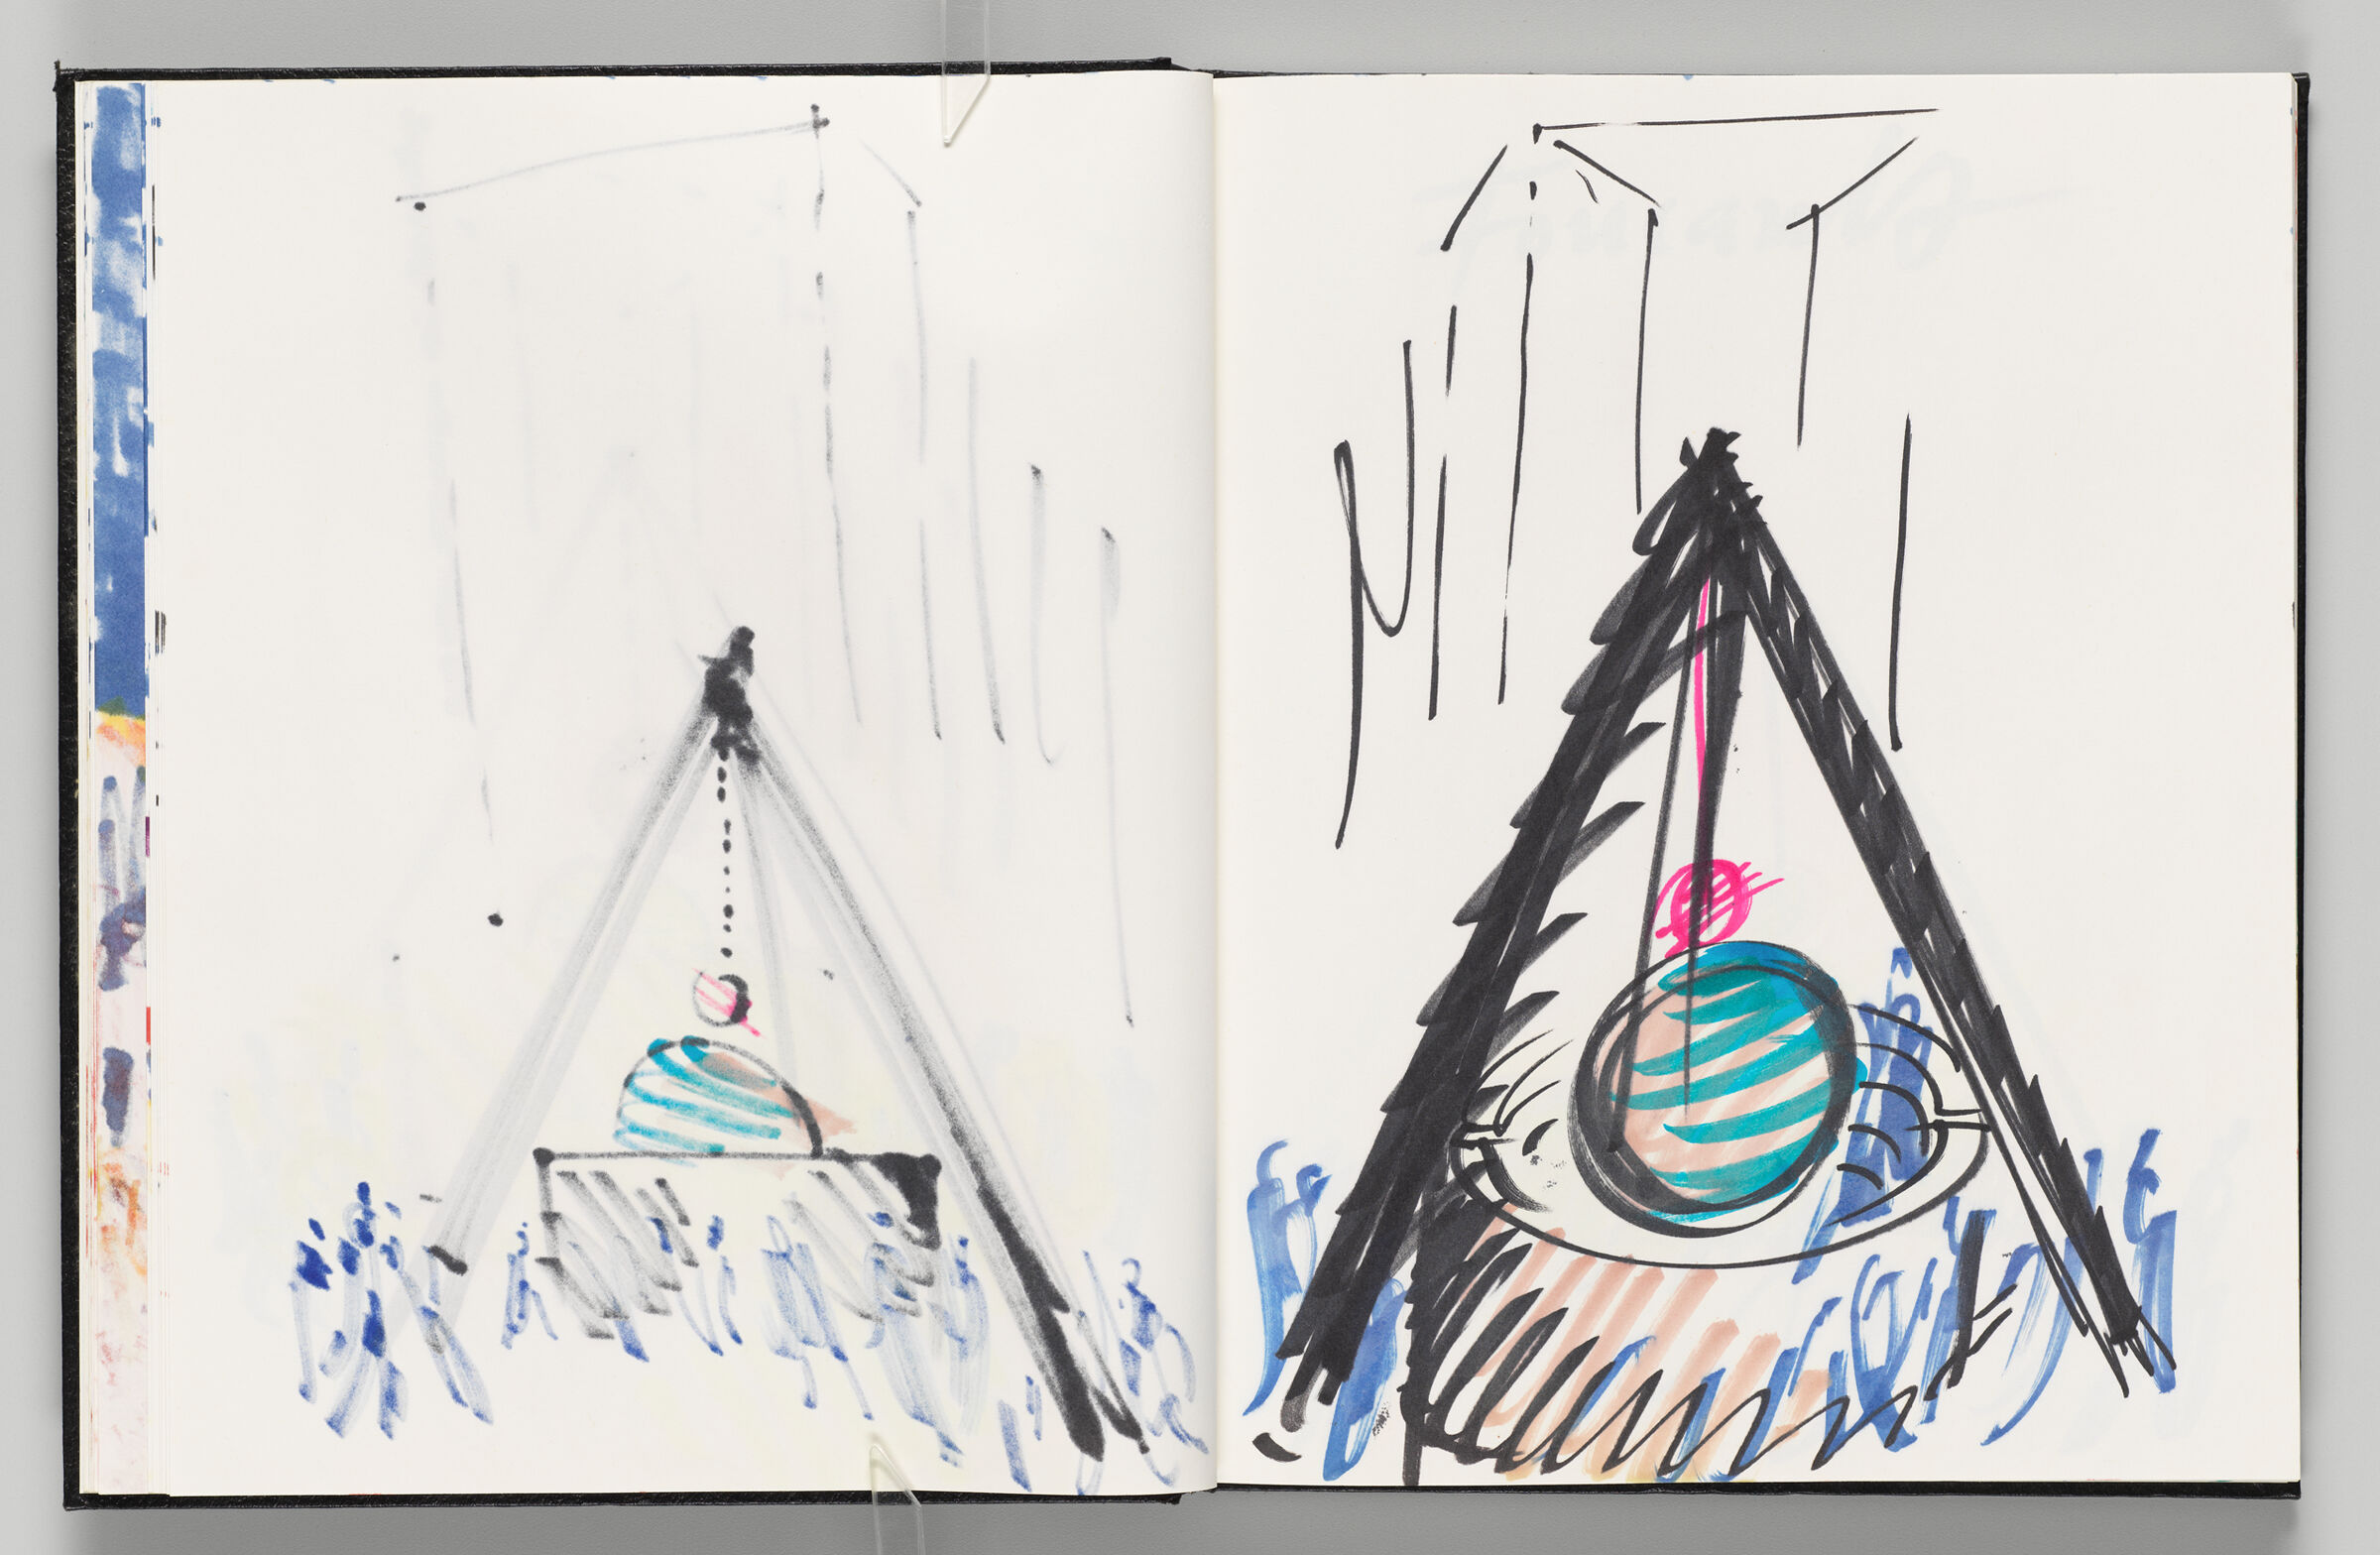 Untitled (Bleed-Through Of Previous Page, Left Page); Untitled (Design For Light Work, Right Page)